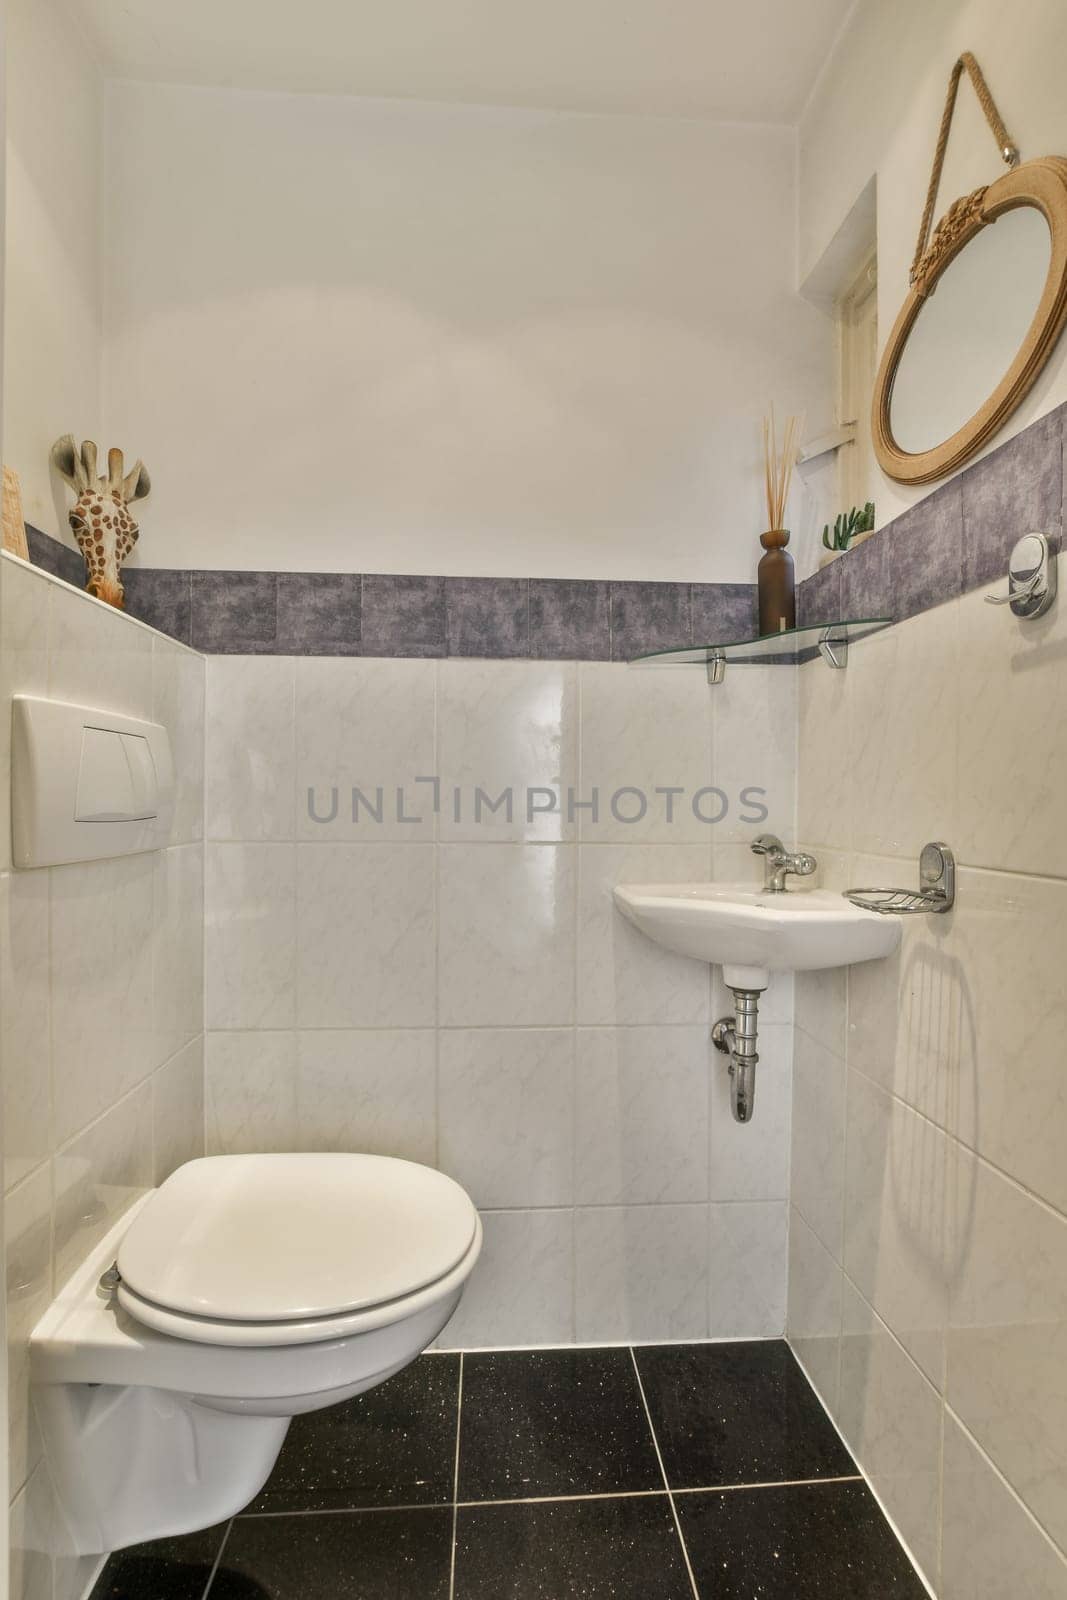 a small bathroom with black and white tiles on the floor, sink, toilet and mirror in the corner area